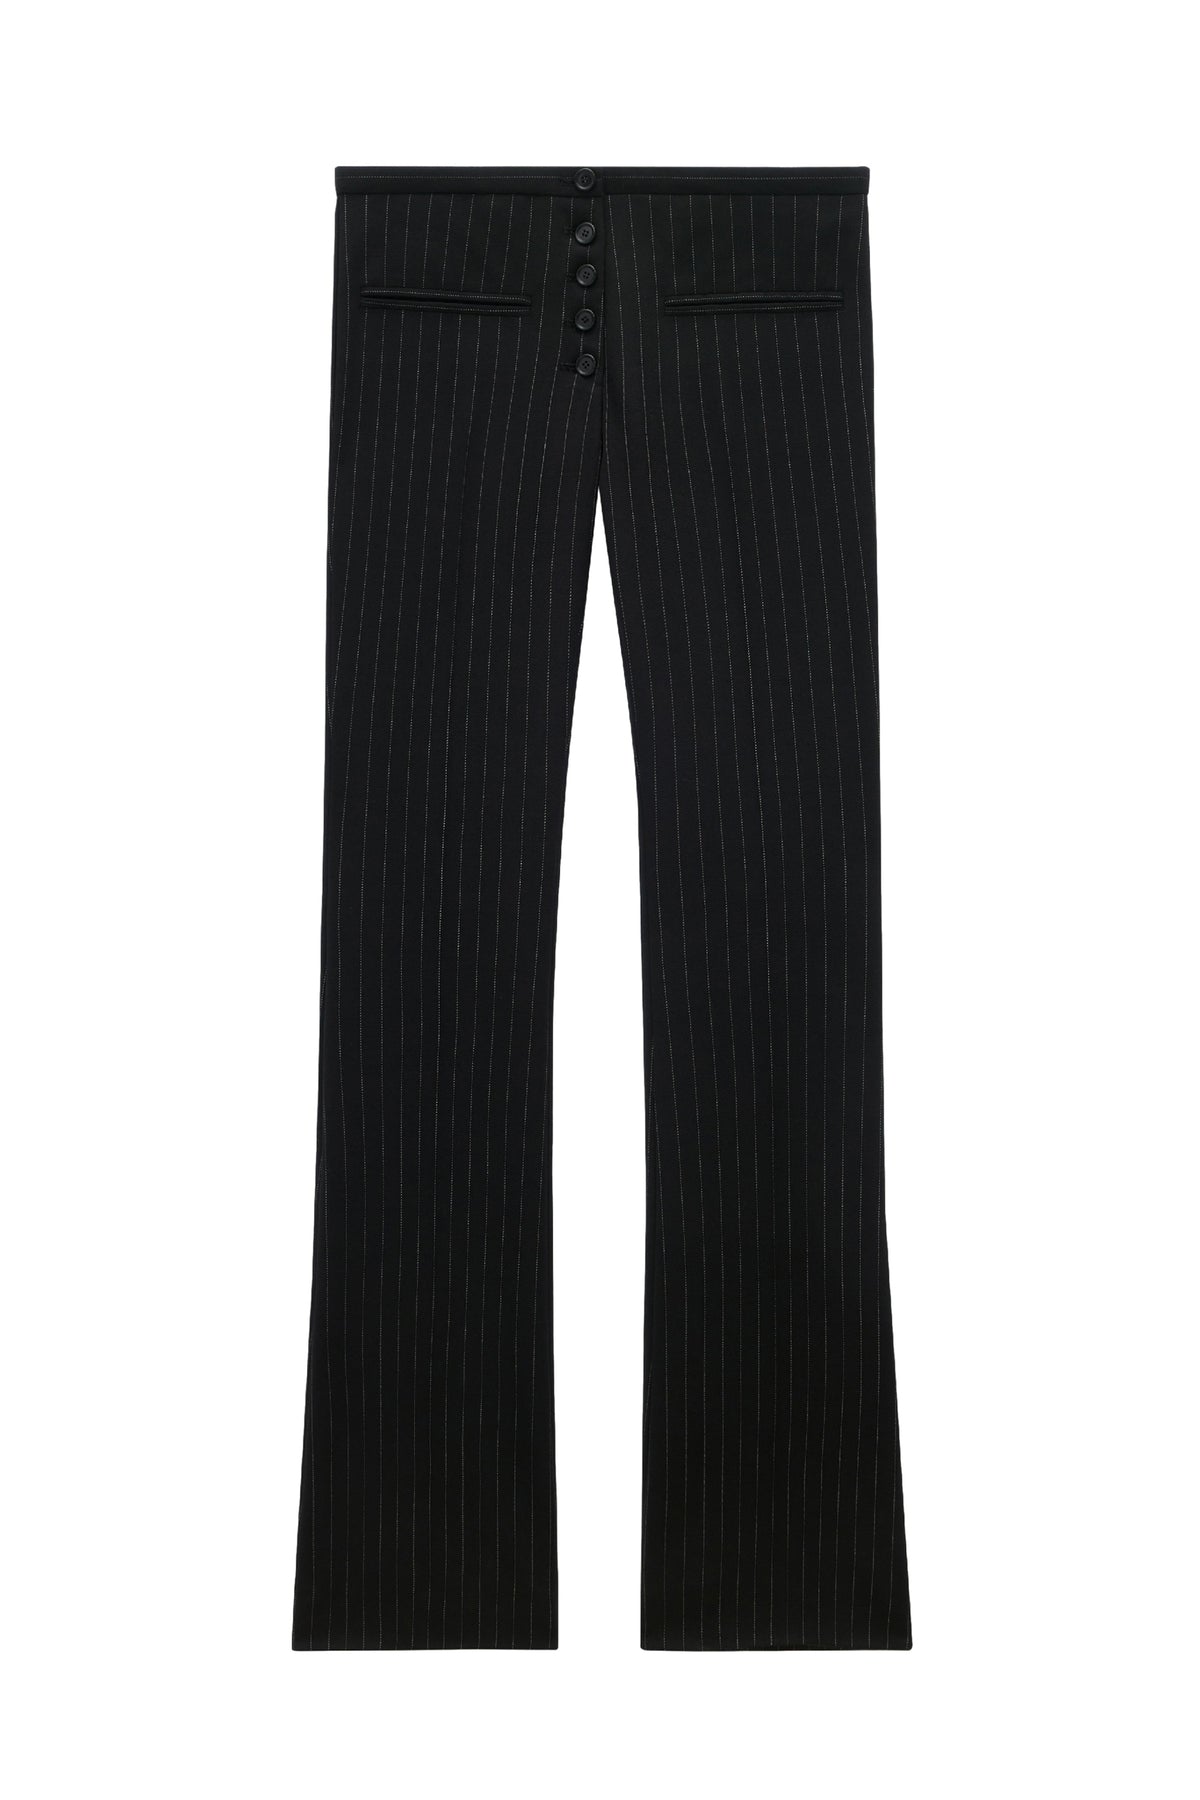 TAILORED SNAPS PINSTRIPES PANTS / BLK/WHT